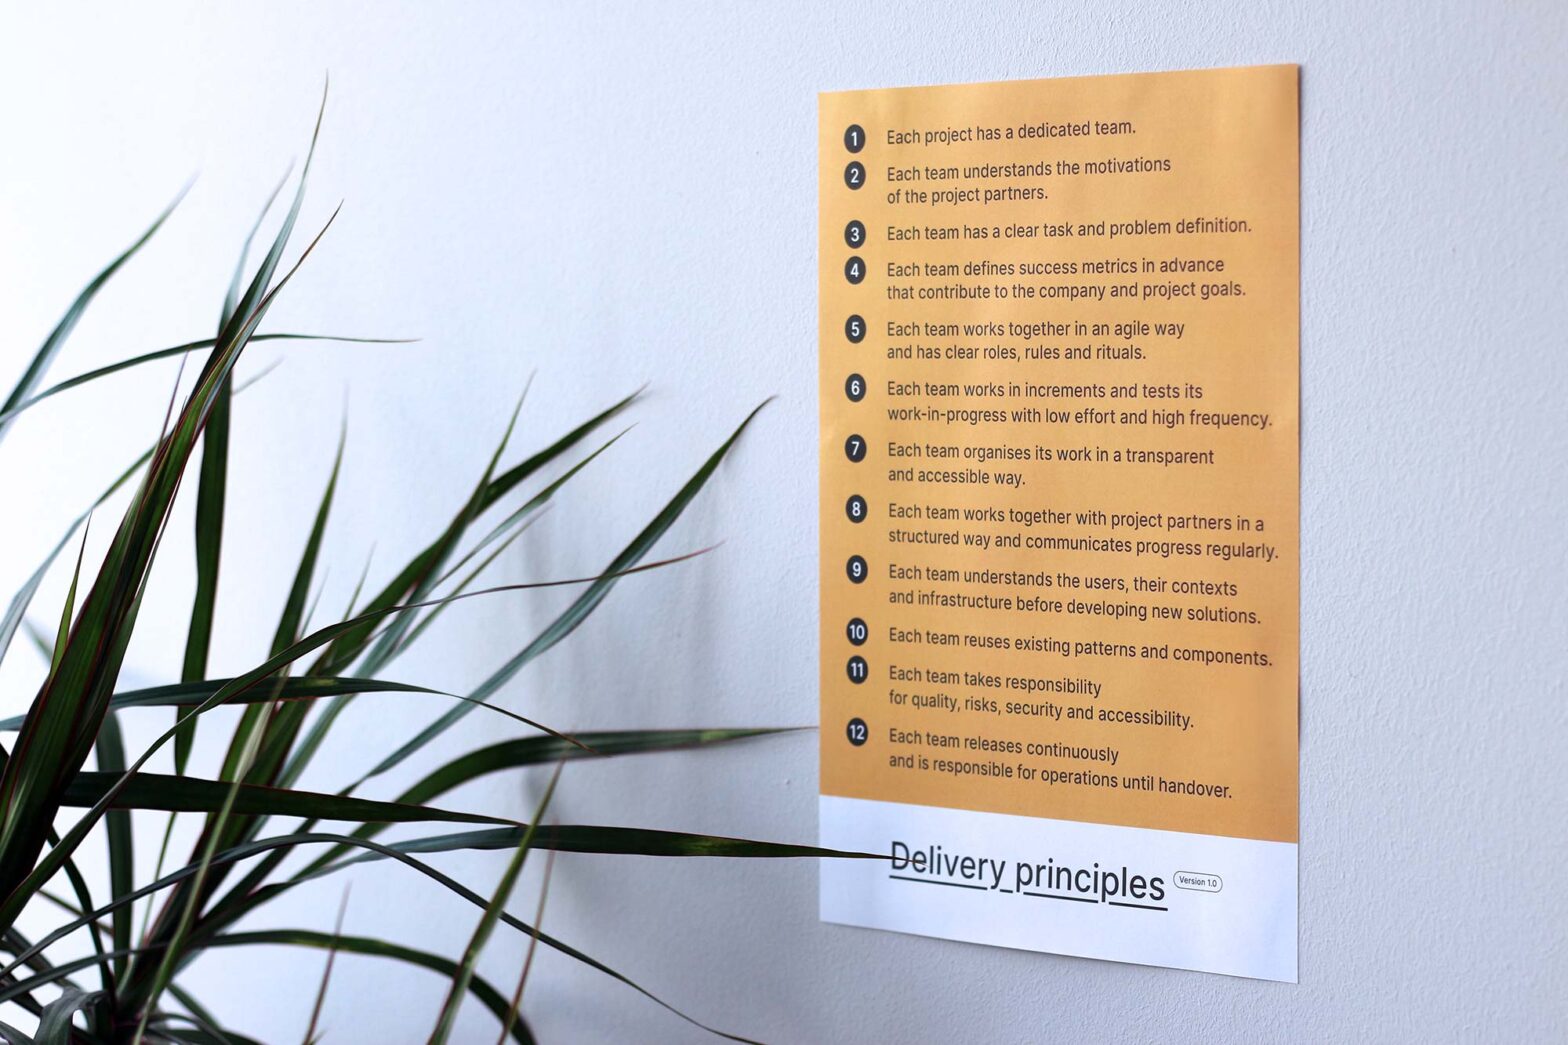 An orange poster on a wall with 12 delivery principles